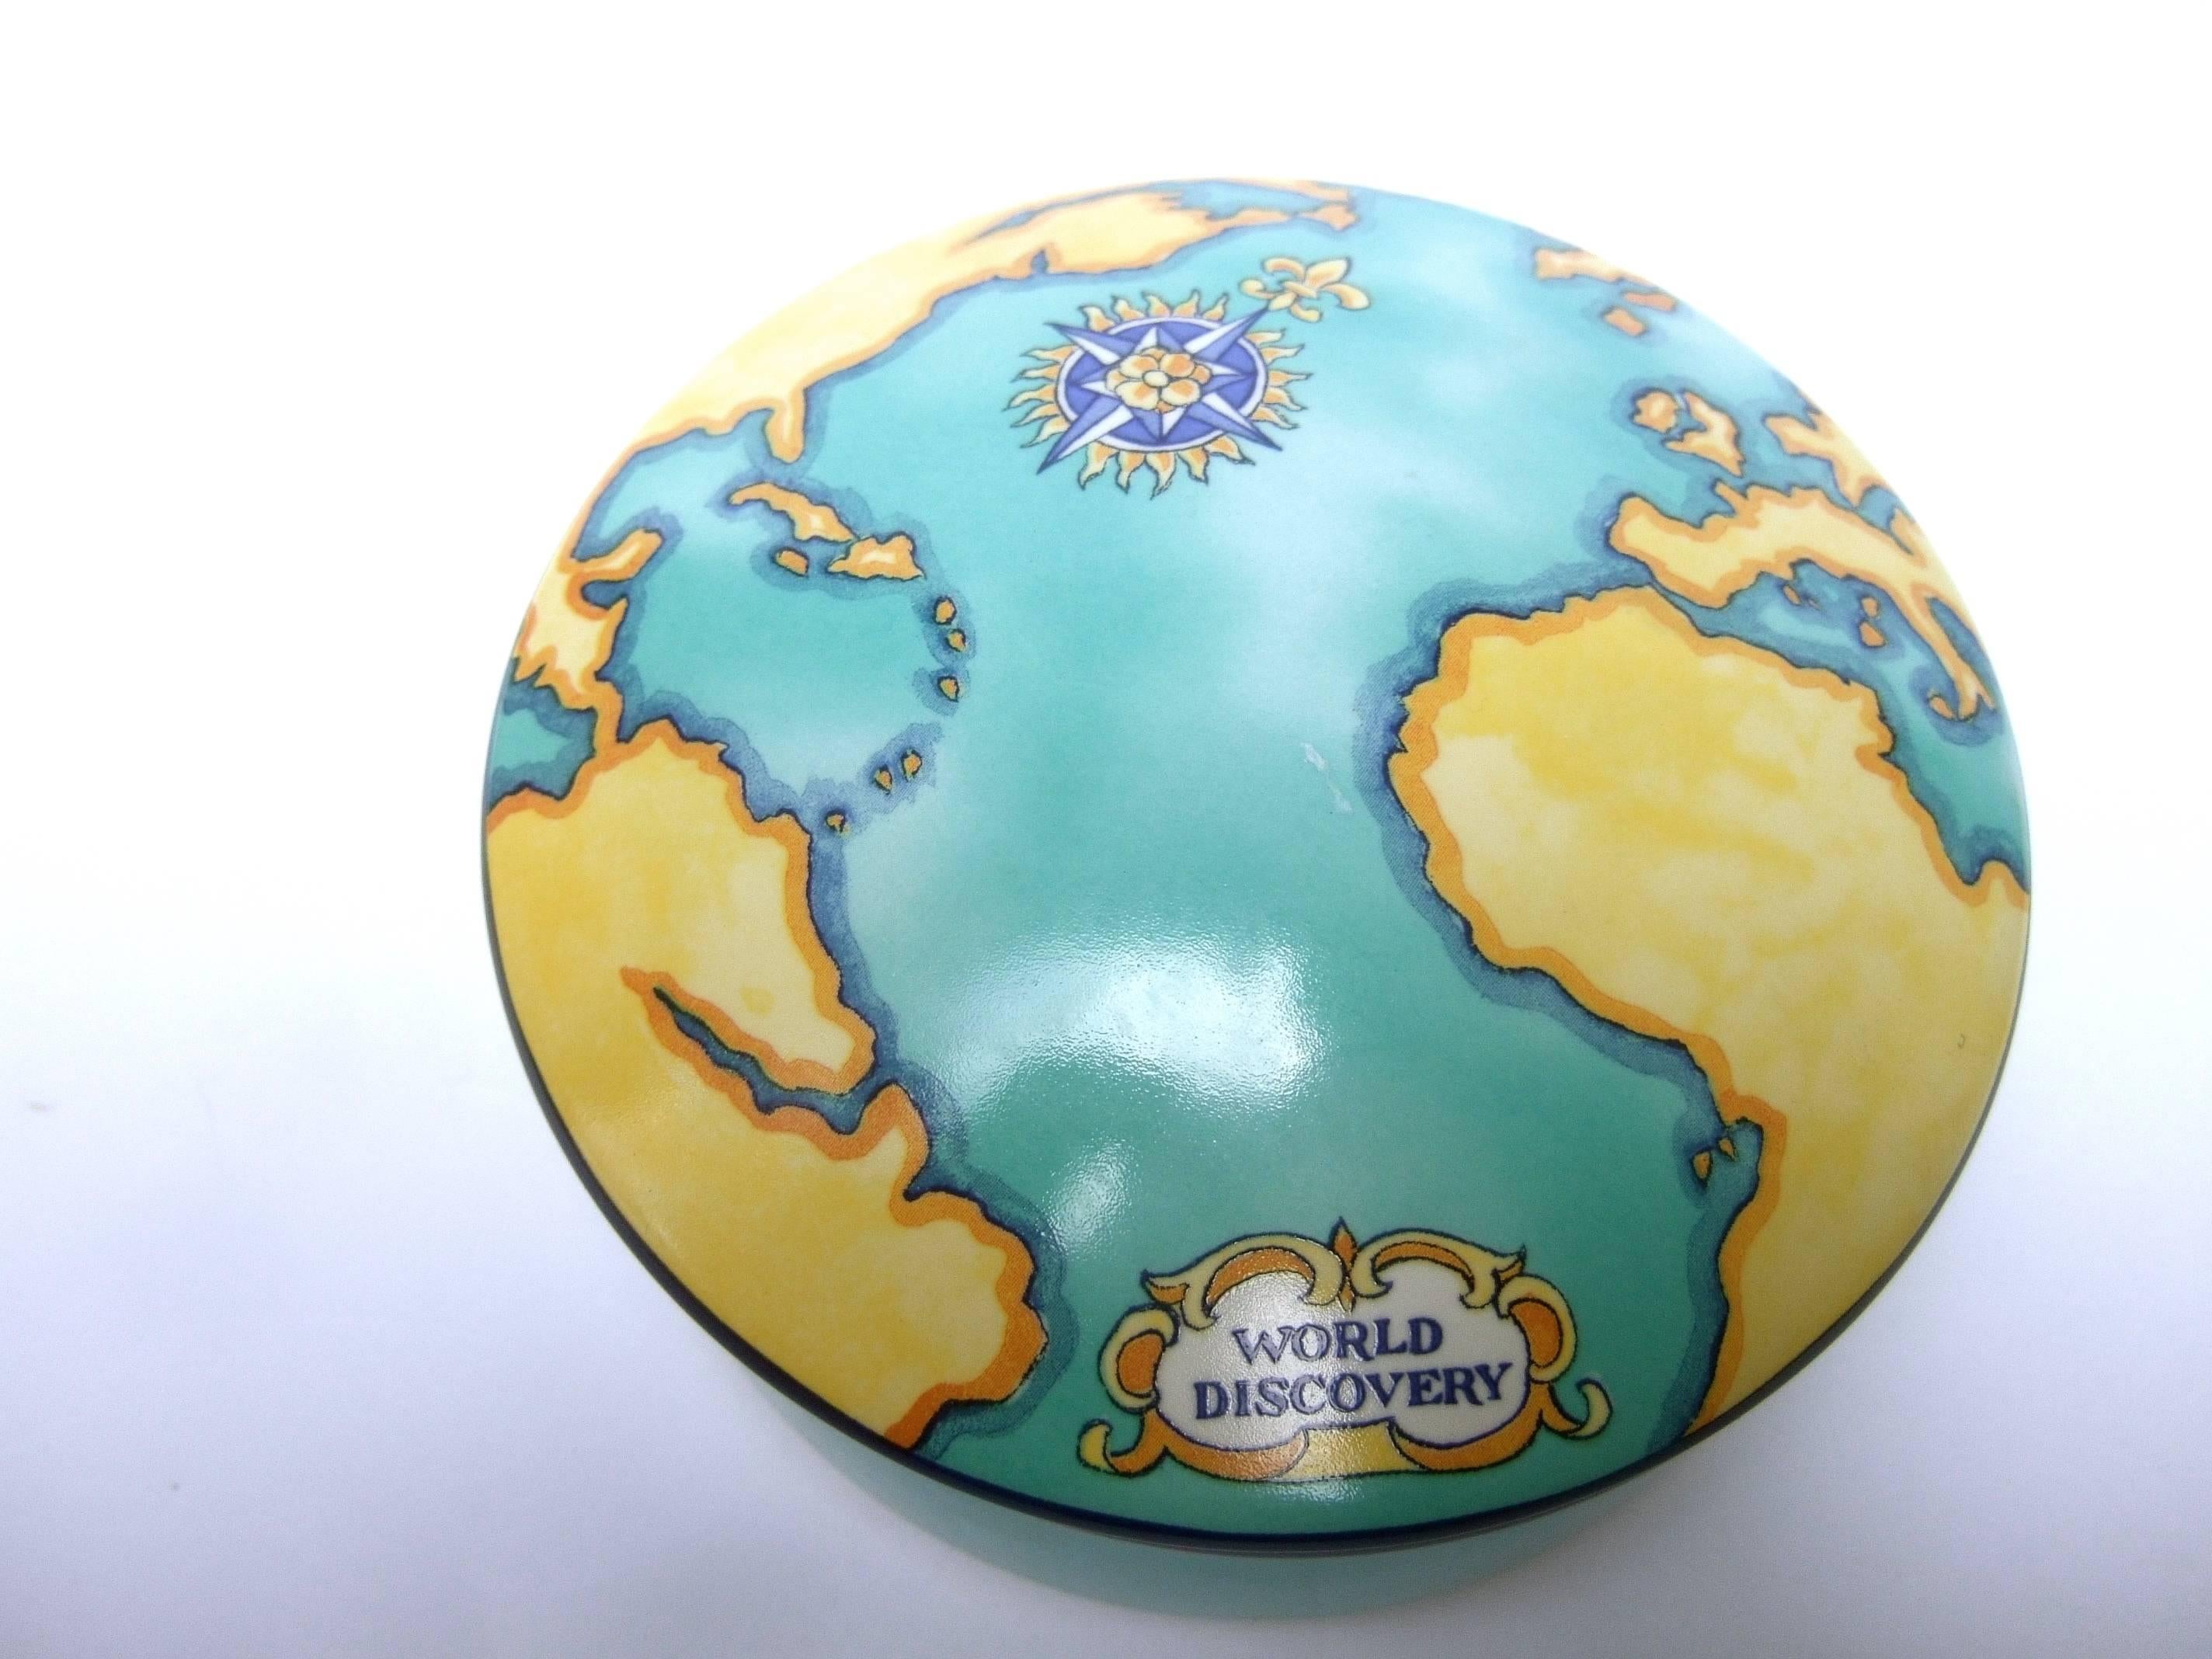 Tiffany & Co. Porcelain Round Map Dish Designed for Tauck World Made In France 2